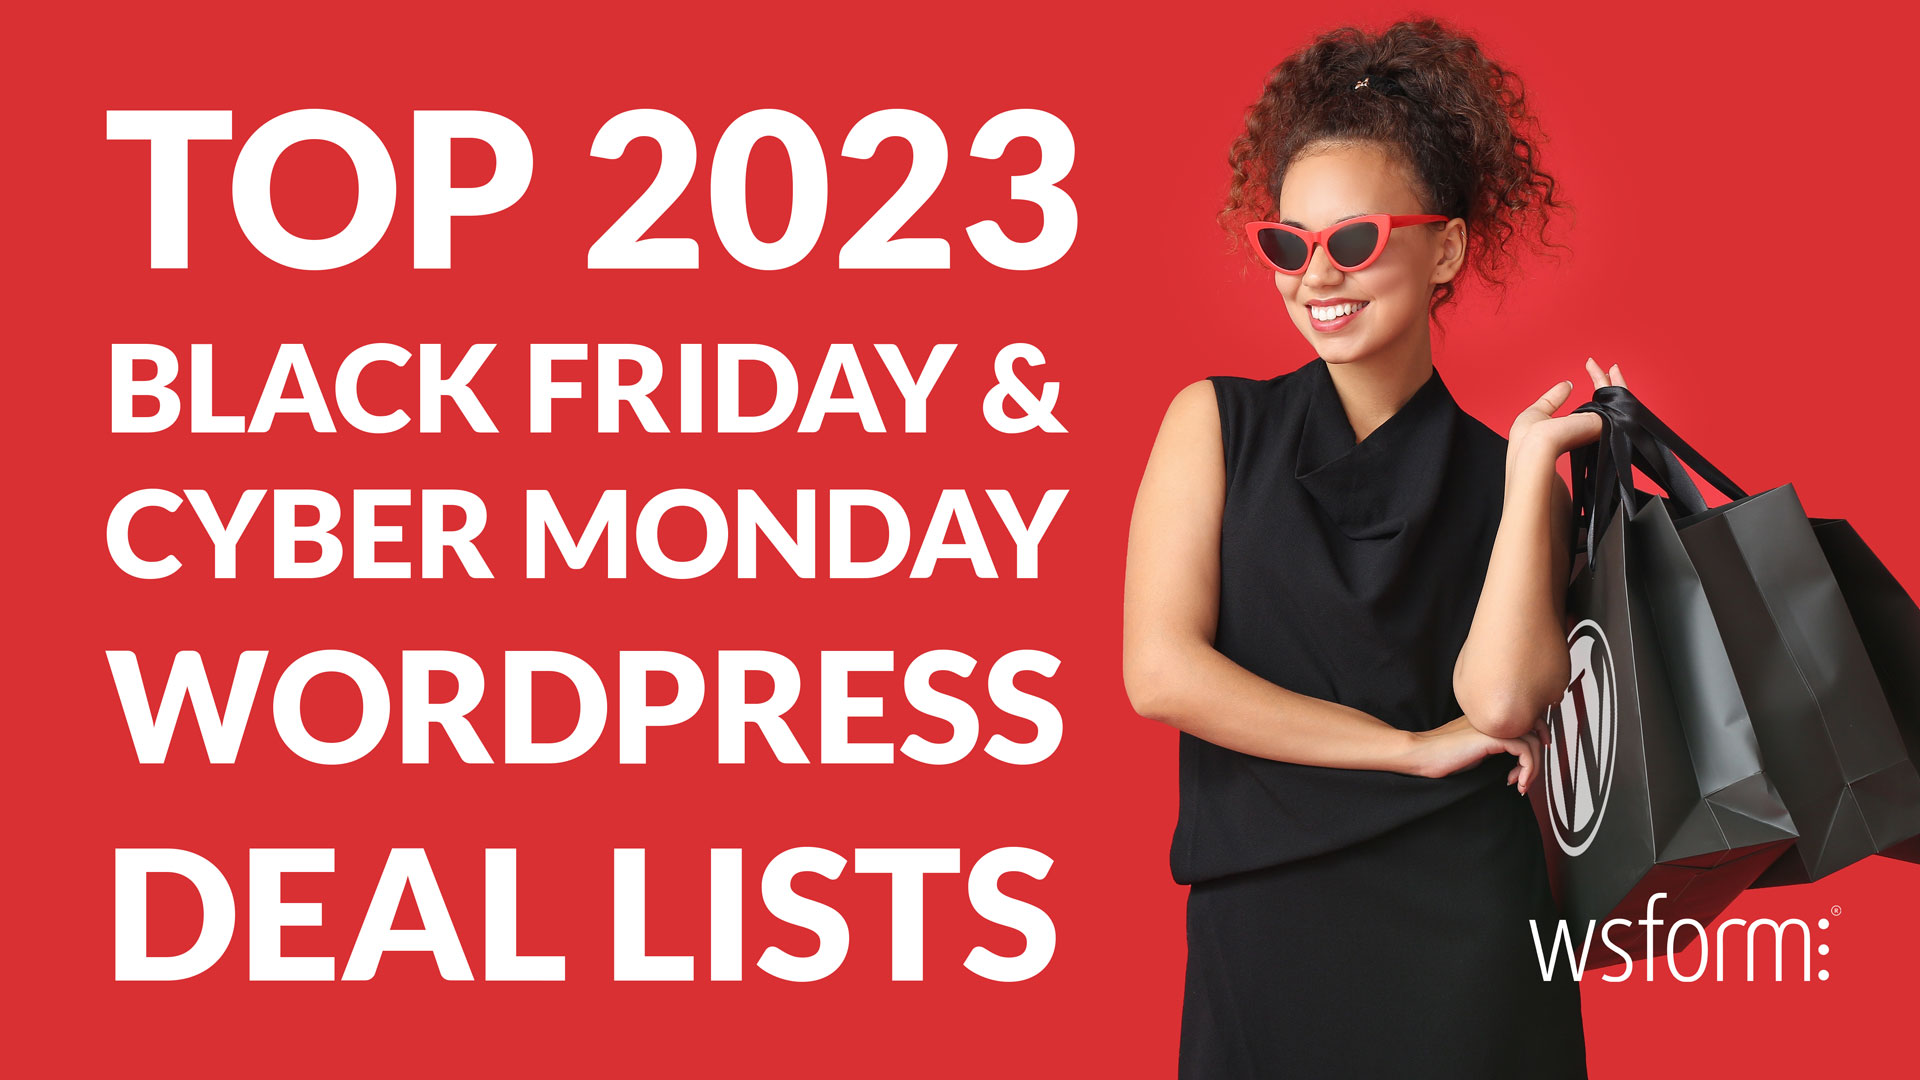 2023 Black Friday & Cyber Monday Wordress Deal Lists